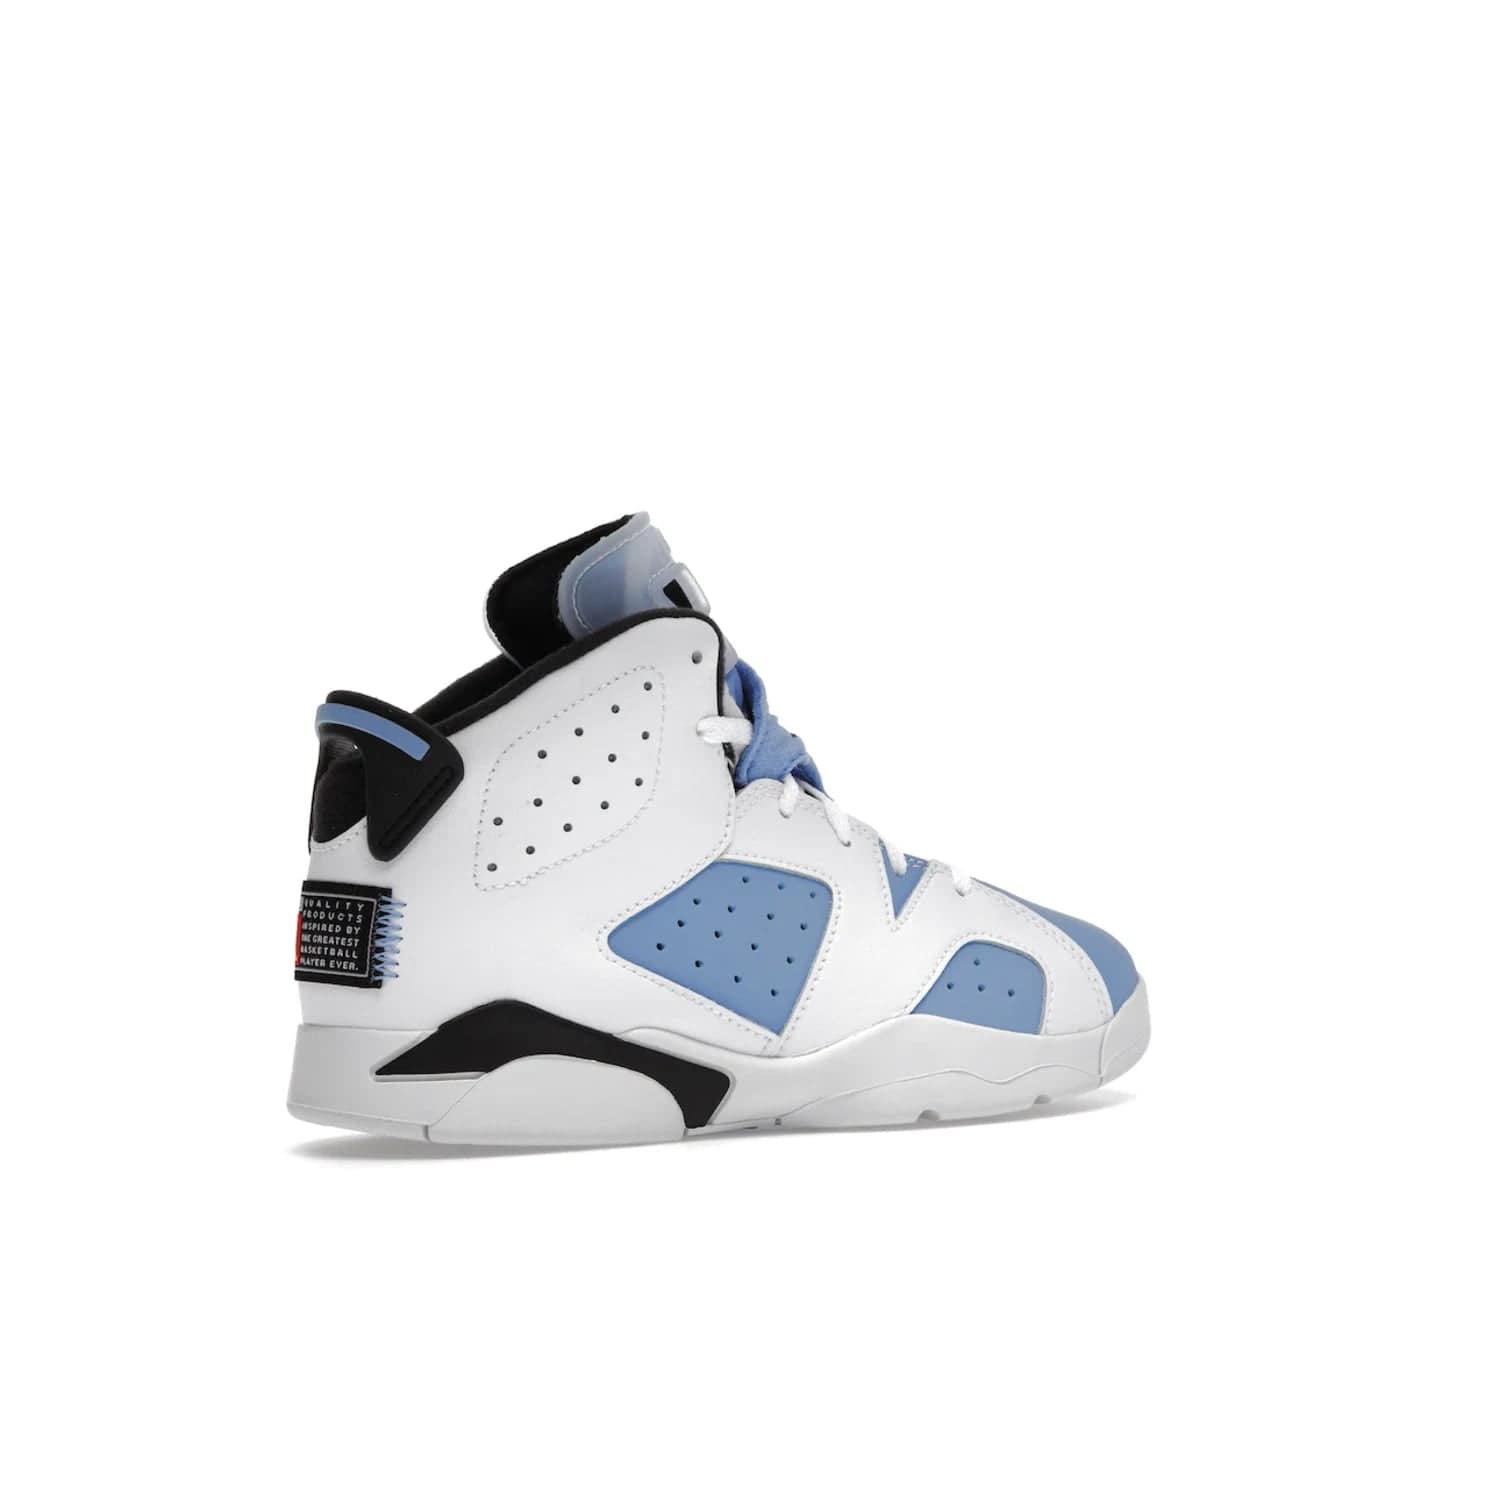 Jordan 6 Retro UNC White (PS) - Image 34 - Only at www.BallersClubKickz.com - The Air Jordan 6 Retro UNC White PS celebrates Michael Jordan's alma mater, the University of North Carolina. It features a classic color-blocking of the iconic Jordan 6 Carmine and a stitched Jordan Team patch. This must-have sneaker released on April 27th, 2022. Referencing the university colors, get this shoe for a stylish and timeless style with university pride.